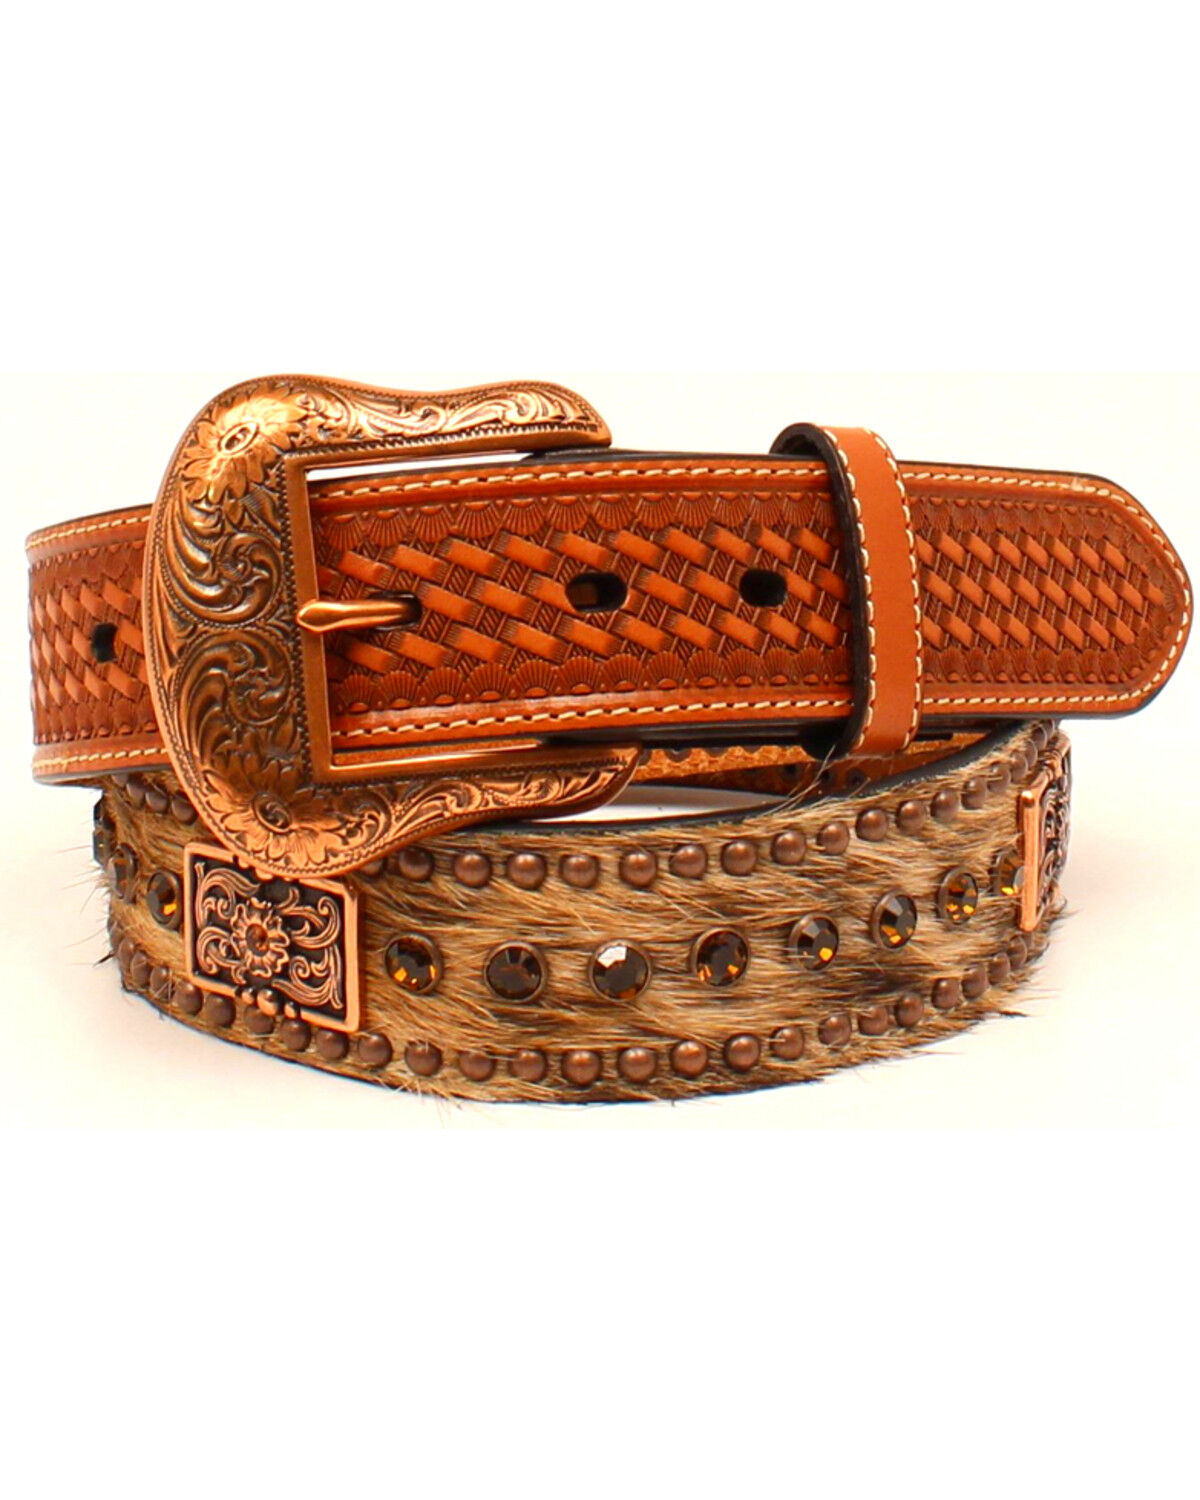 STAR Concho ~Brown TOOLED Leather ~MAN'S WESTERN BELT~ N25100 Silver NOCONA 14 